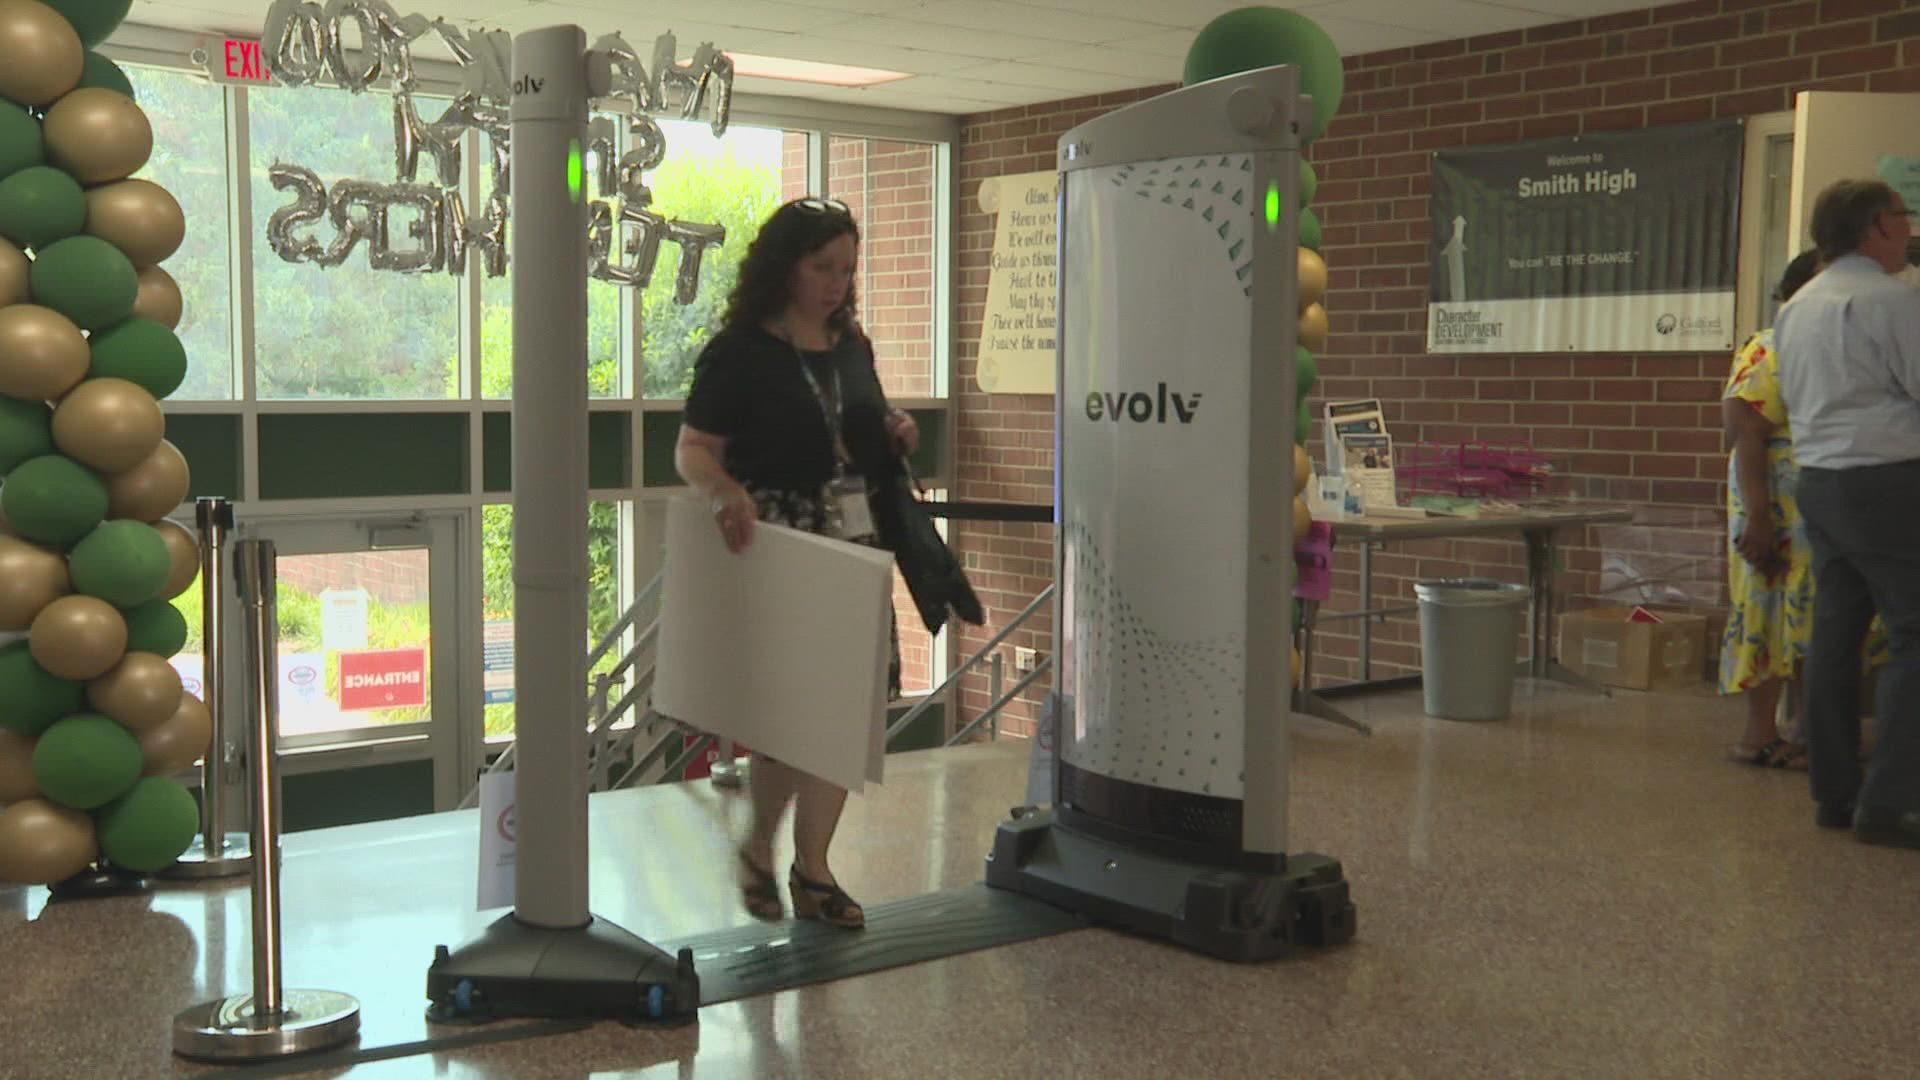 School leaders Wednesday held an open house to get feedback from students and parents about body scanners on campuses.